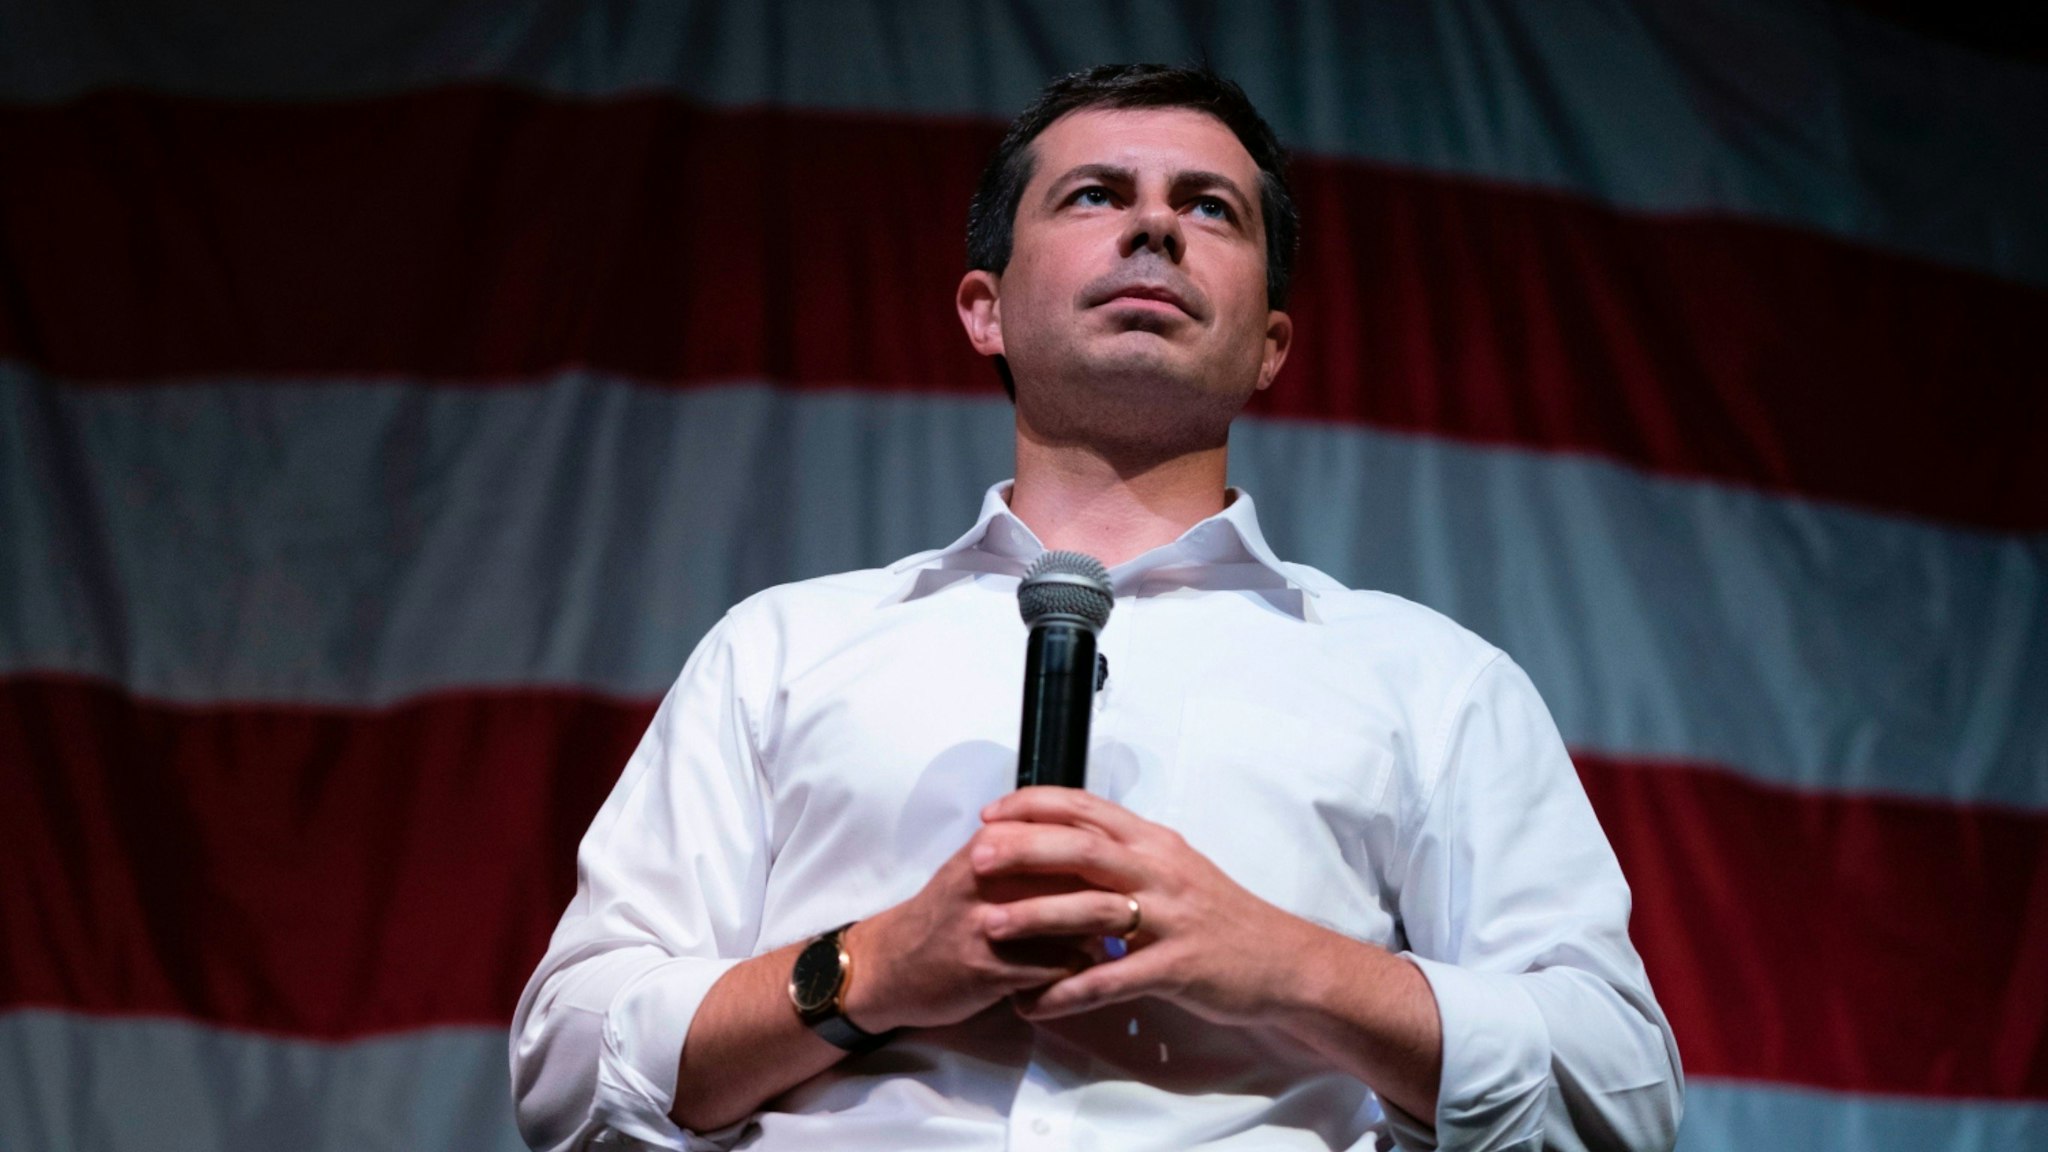 Democratic presidential hopeful Mayor of South Bend, Indiana Pete Buttigieg speaks at the Wing Ding Dinner on August 9, 2019 in Clear Lake, Iowa.